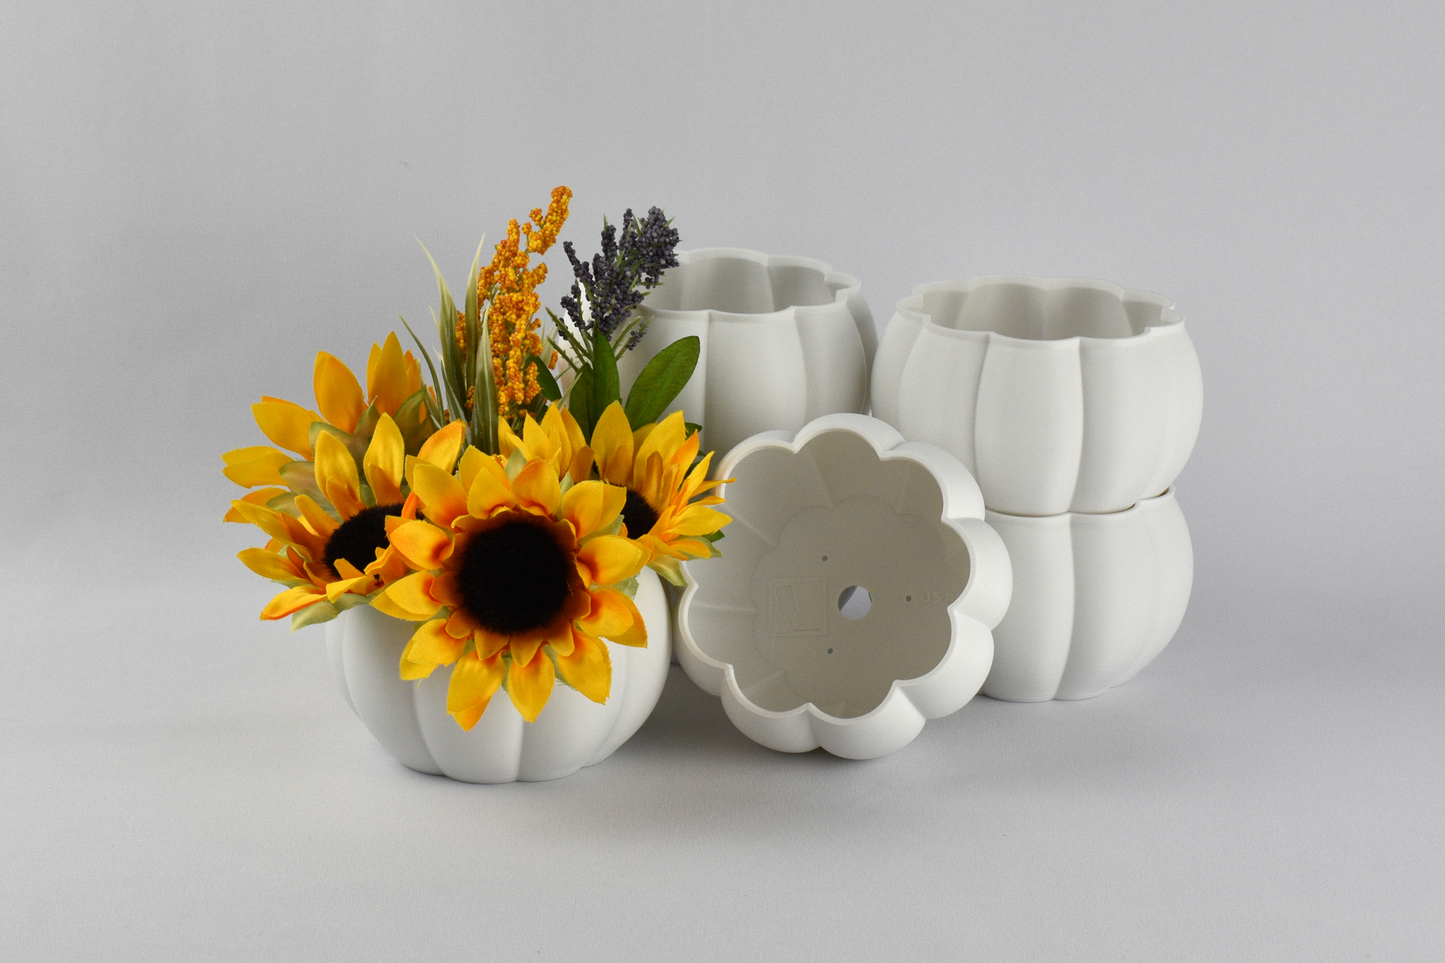 Matte White Pumpkin Planters, Size Small, For Fall Weddings, Baby Showers, Thanksgiving, Keepsake and Fall Decor